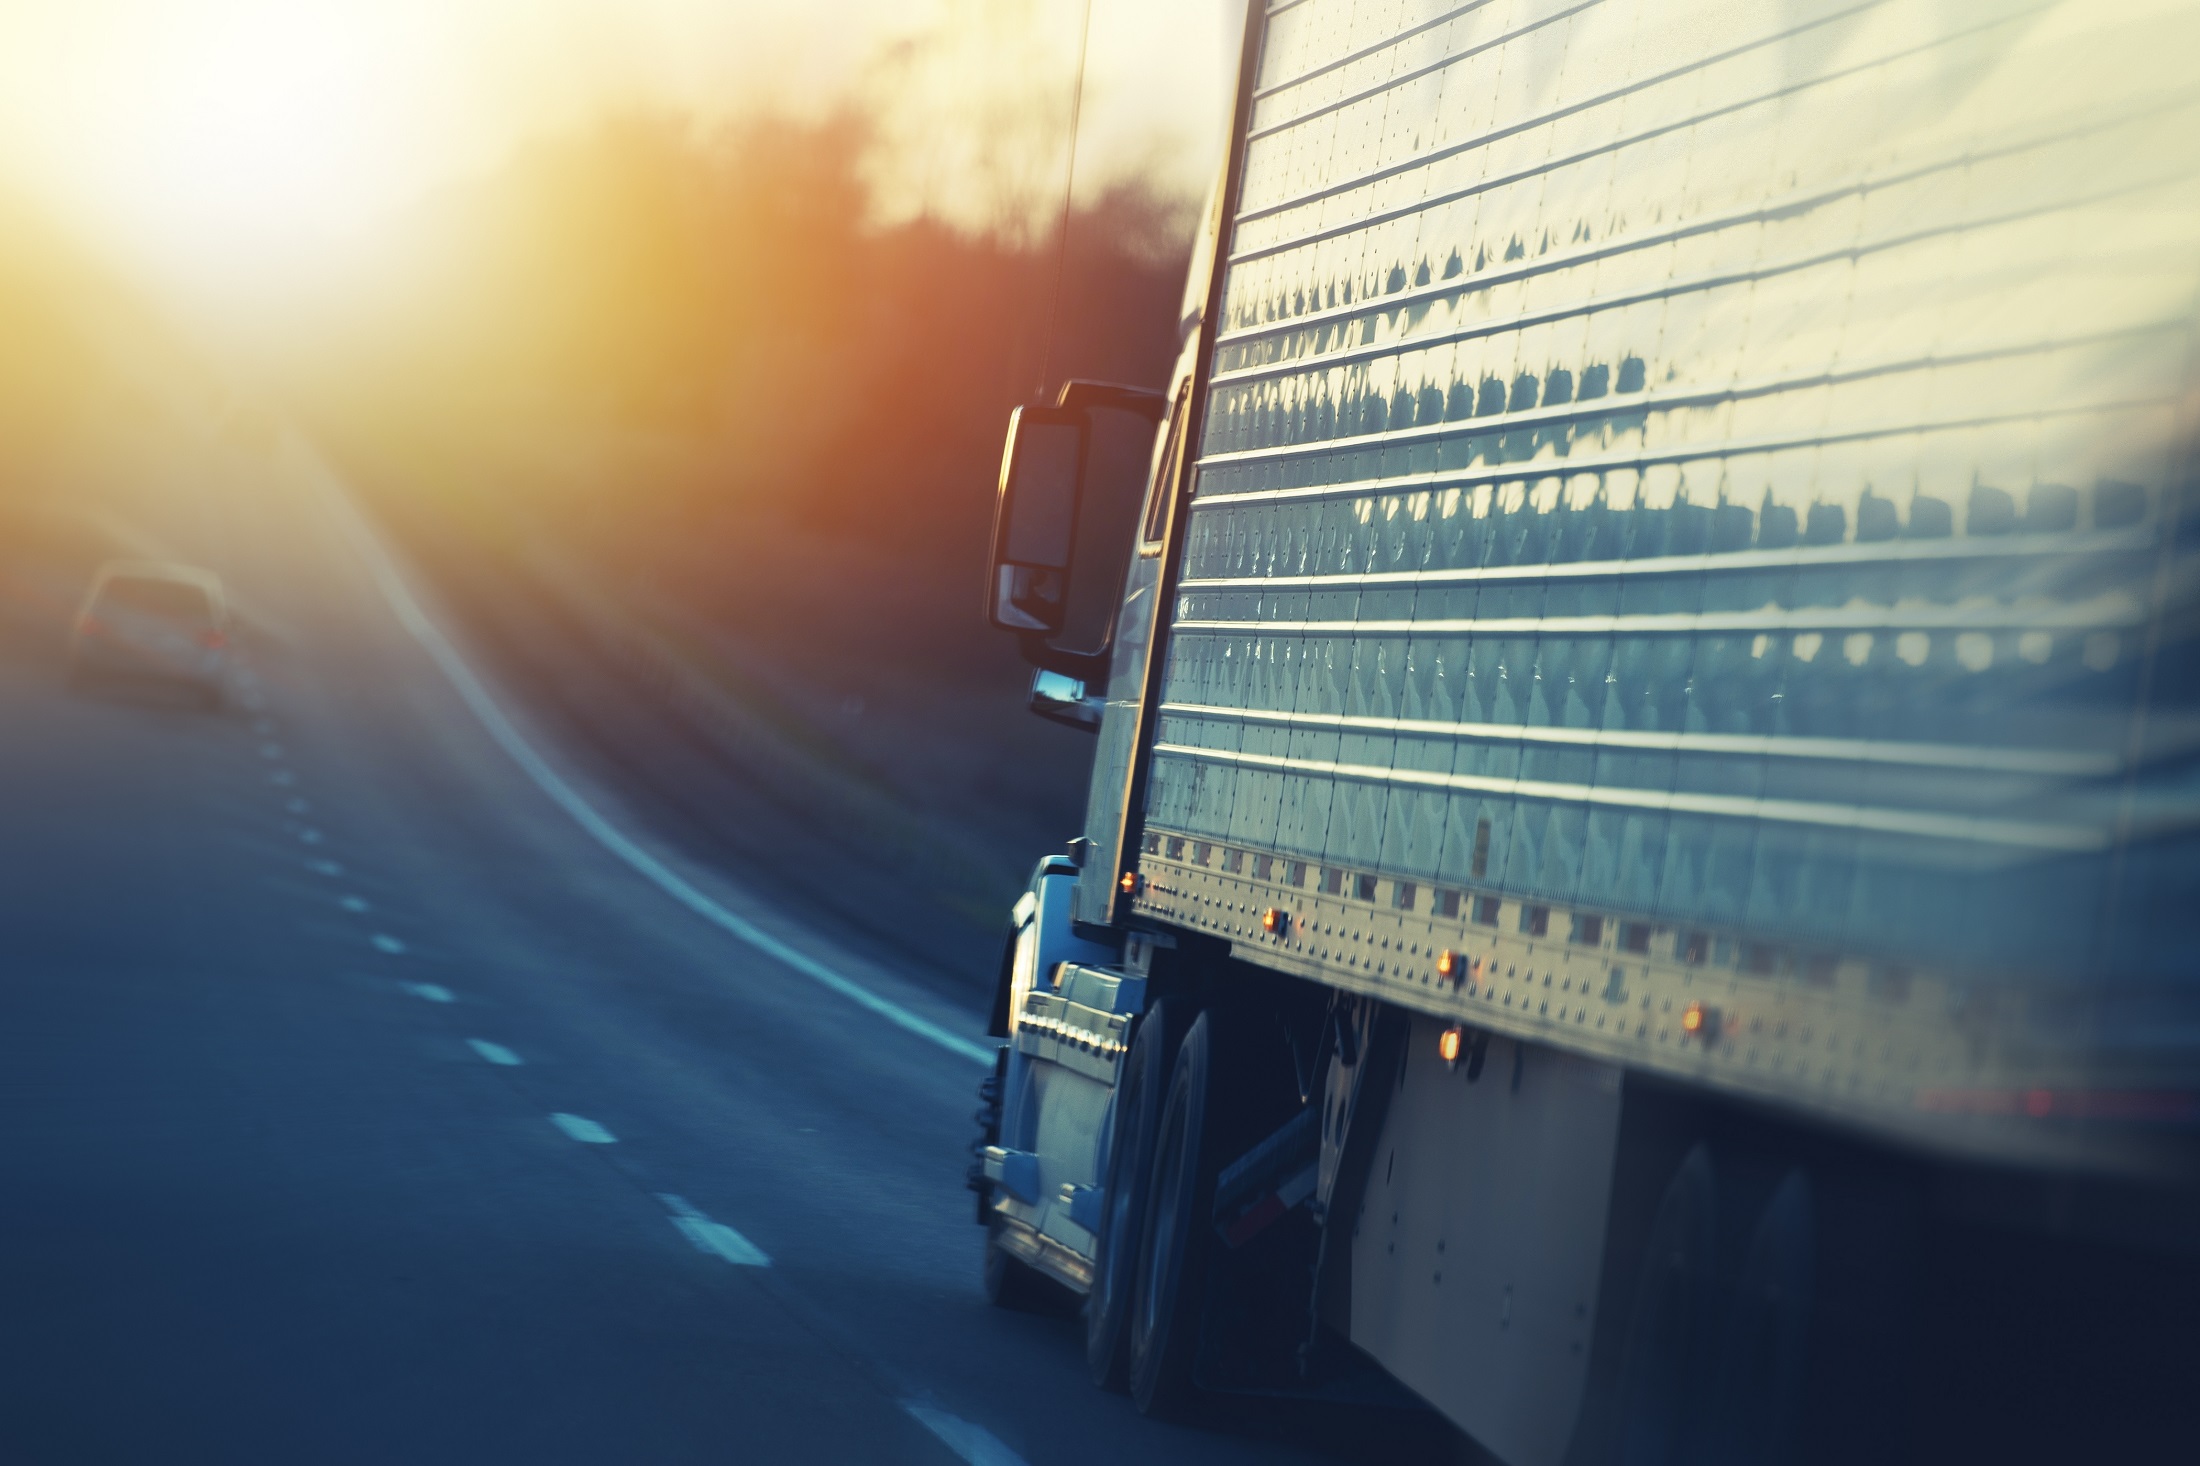 Trucking Industry Assistance is Theme for 2022 Main Photo